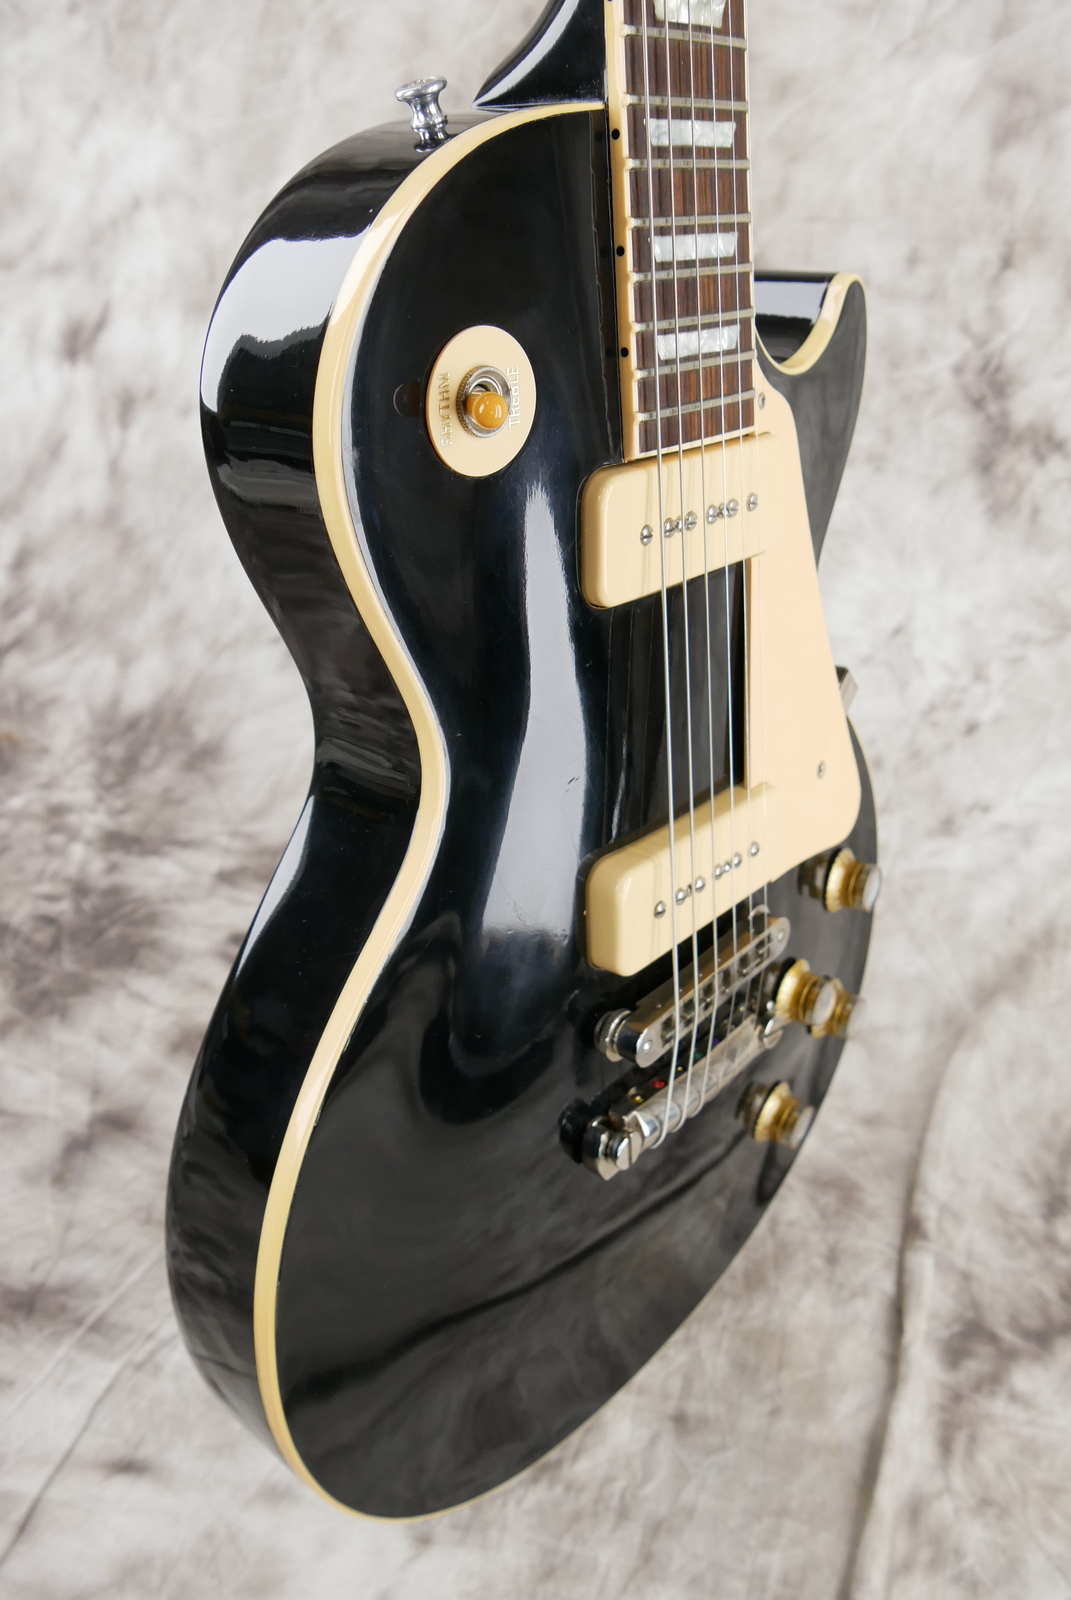 img/vintage/5337/Gibson_Les_Paul_Deluxe_limited_edtion_black_2000-005.JPG